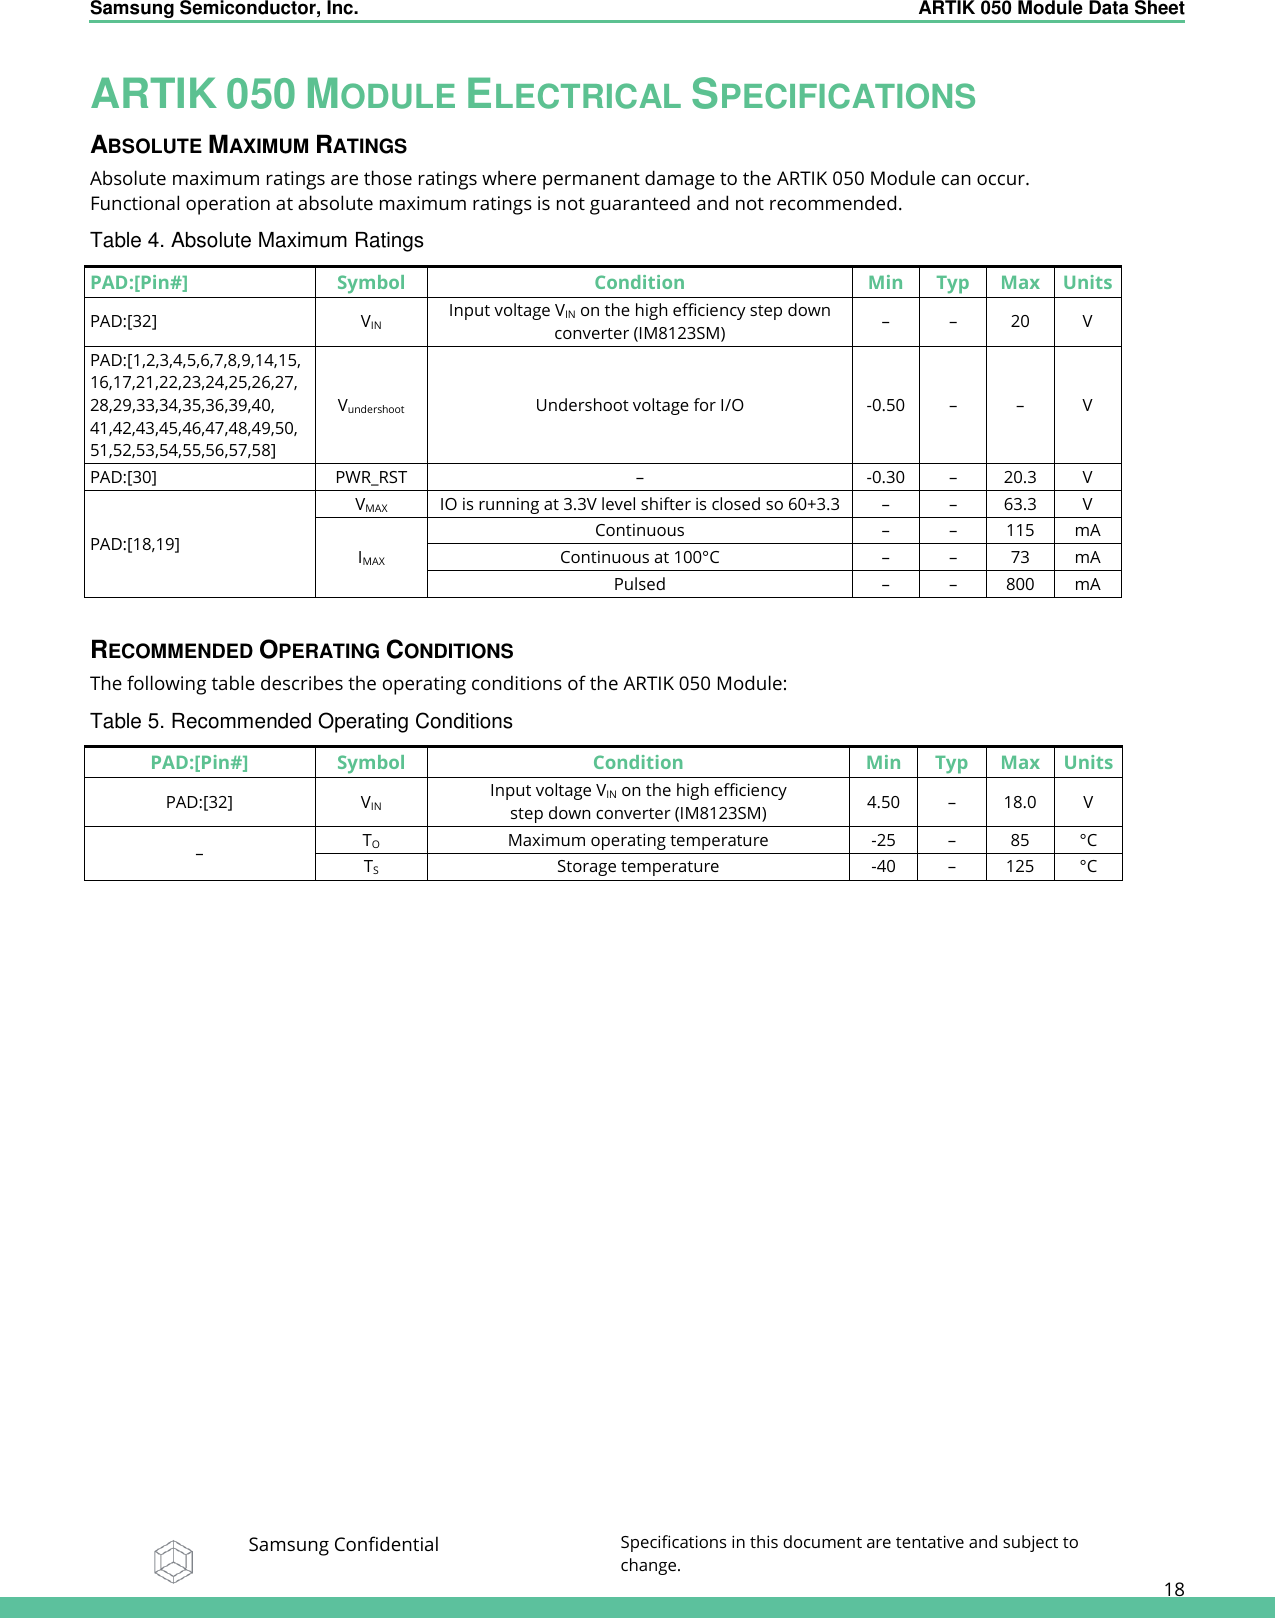 Samsung Semiconductor, Inc.  ARTIK 050 Module Data Sheet   Samsung Confidential Specifications in this document are tentative and subject to change.  18 ARTIK 050 MODULE ELECTRICAL SPECIFICATIONS ABSOLUTE MAXIMUM RATINGS Absolute maximum ratings are those ratings where permanent damage to the ARTIK 050 Module can occur.  Functional operation at absolute maximum ratings is not guaranteed and not recommended. Table 4. Absolute Maximum Ratings PAD:[Pin#] Symbol Condition Min Typ Max Units PAD:[32] VIN Input voltage VIN on the high efficiency step down converter (IM8123SM) – – 20 V PAD:[1,2,3,4,5,6,7,8,9,14,15, 16,17,21,22,23,24,25,26,27, 28,29,33,34,35,36,39,40, 41,42,43,45,46,47,48,49,50, 51,52,53,54,55,56,57,58] Vundershoot Undershoot voltage for I/O -0.50 – – V PAD:[30] PWR_RST – -0.30 – 20.3 V PAD:[18,19] VMAX IO is running at 3.3V level shifter is closed so 60+3.3 – – 63.3 V IMAX Continuous – – 115 mA Continuous at 100°C – – 73 mA Pulsed – – 800 mA  RECOMMENDED OPERATING CONDITIONS The following table describes the operating conditions of the ARTIK 050 Module: Table 5. Recommended Operating Conditions PAD:[Pin#] Symbol Condition Min Typ Max Units PAD:[32] VIN Input voltage VIN on the high efficiency  step down converter (IM8123SM) 4.50 – 18.0 V – TO Maximum operating temperature -25 – 85 °C TS Storage temperature -40 – 125 °C  